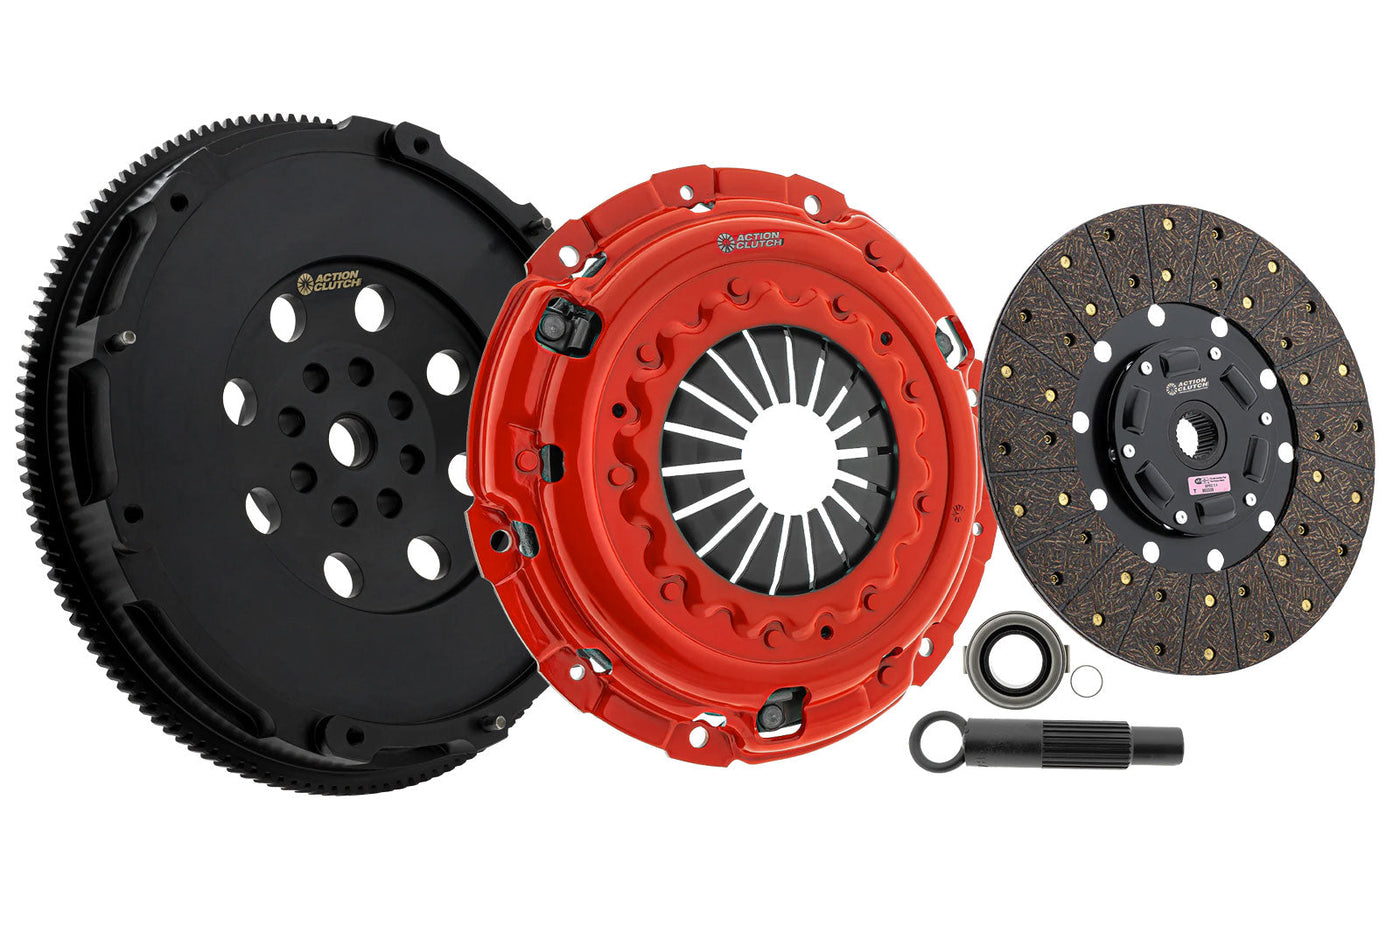 Stage 1 HD Clutch Kit (2OS) for Honda Civic SI 2022 1.5L (L15B7) Turbo Includes Chromoly Lightweight Flywheel